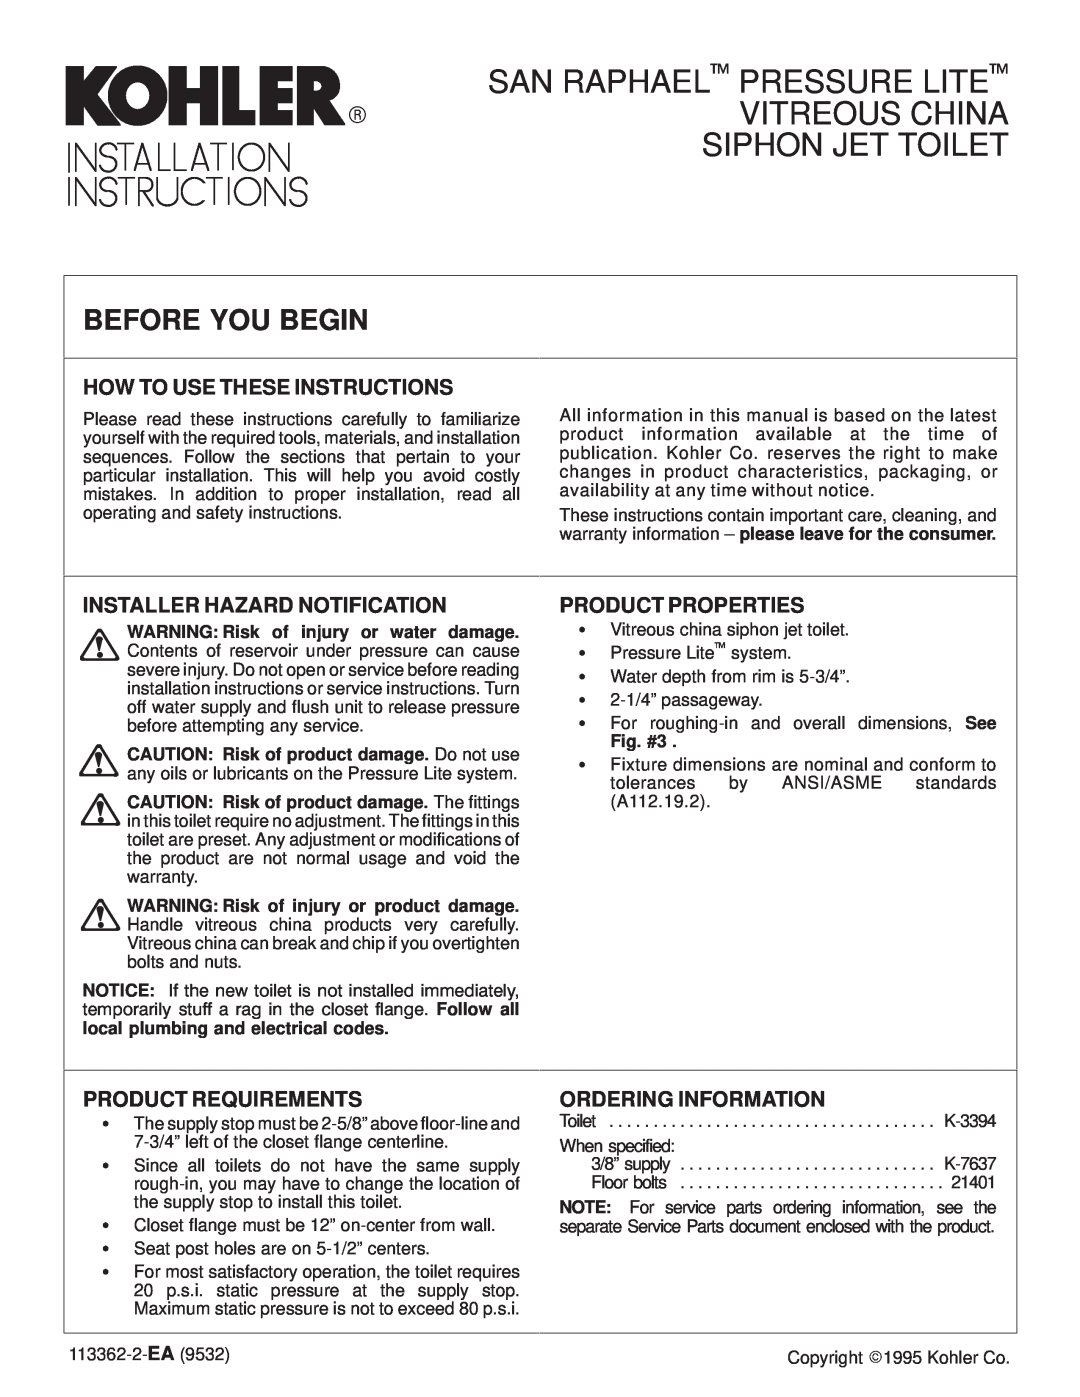 Kohler K-3394 warranty Before You Begin, How To Use These Instructions, Installer Hazard Notification, Fig. #3 